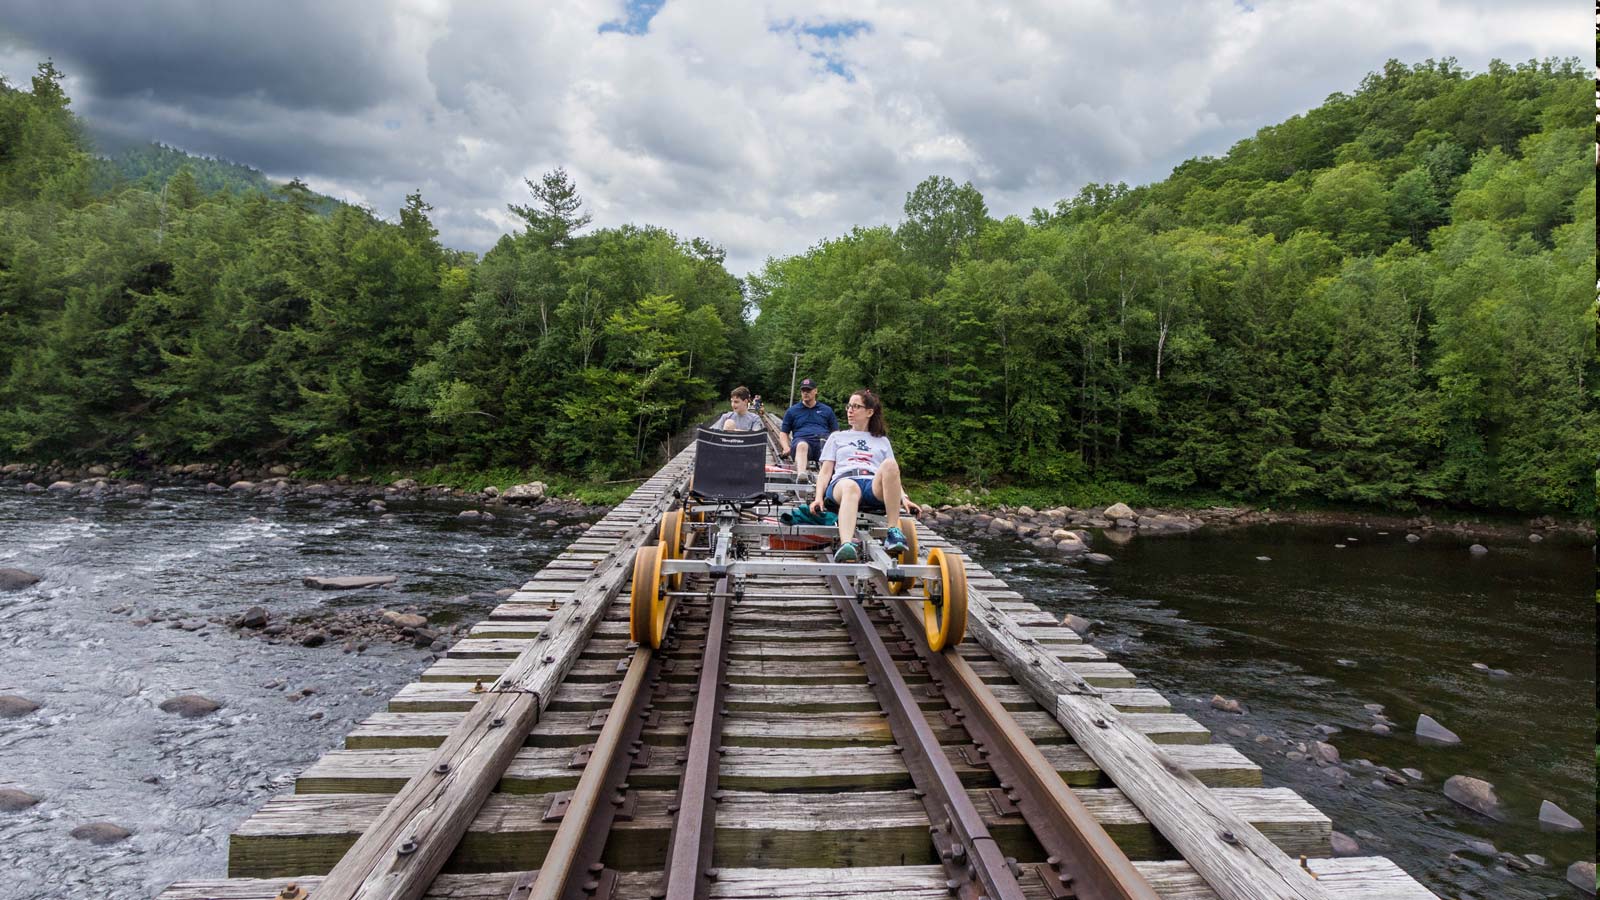 Searching for the best things to do in the Adirondacks? Discover adventurous rail journeys and the most scenic views for your Adirondack vacation